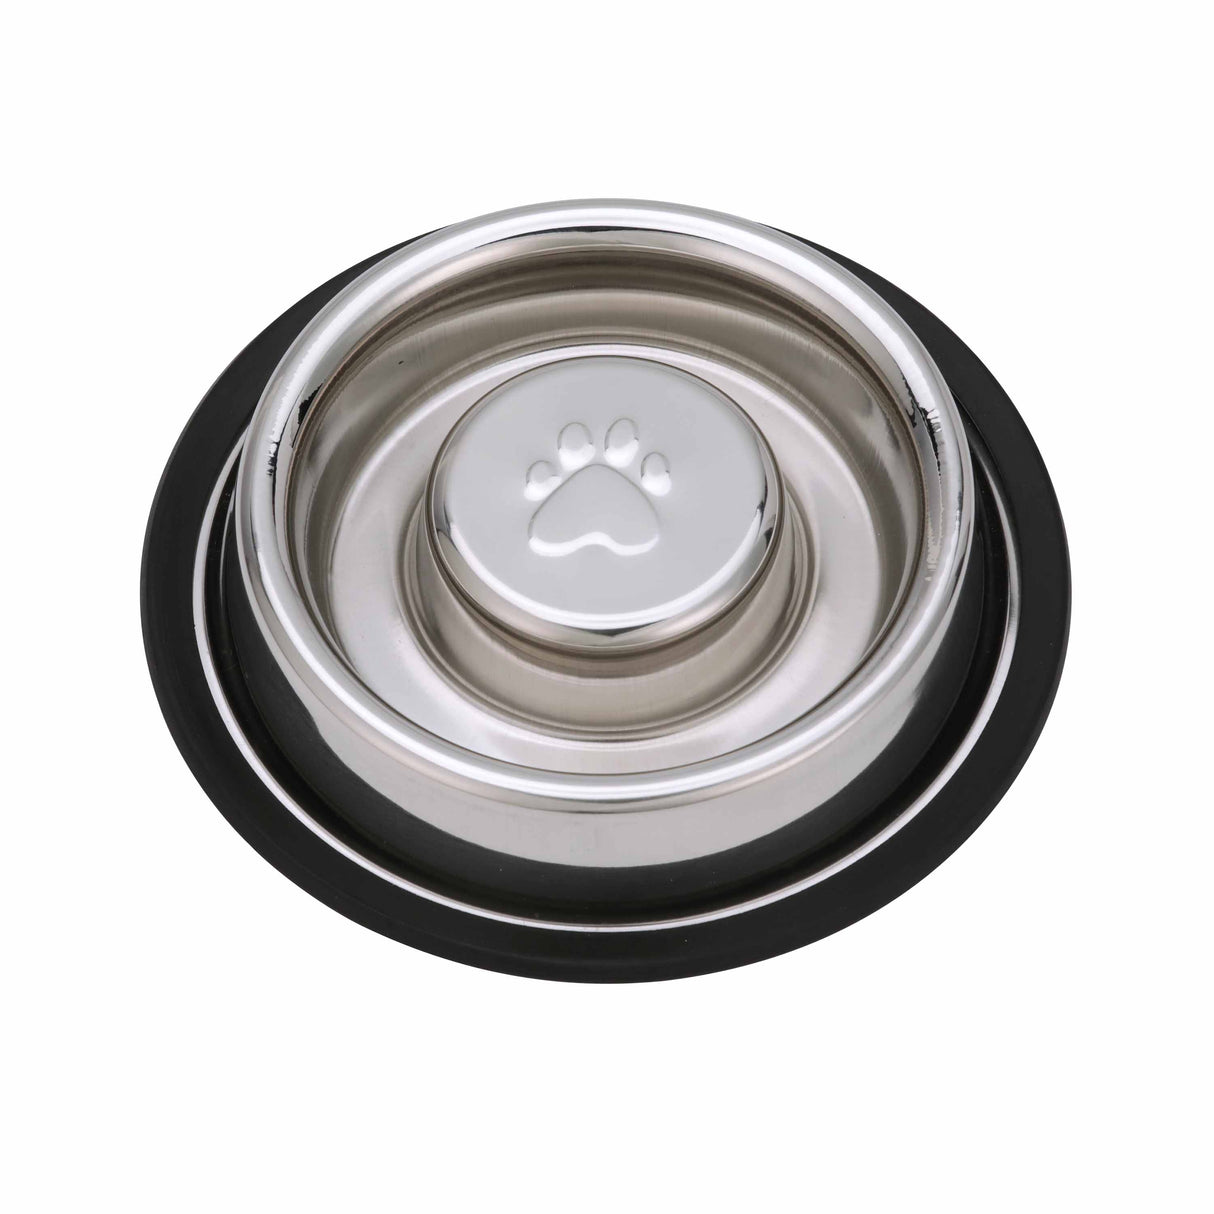 Neater Pet Brands Stainless Steel Slow Feed Bowl - Non-Tip & Non-Skid - Stops Dog Food Gulping, Bloat, Indigestion, and Rapid Eating (Small, 3/4 Cup)